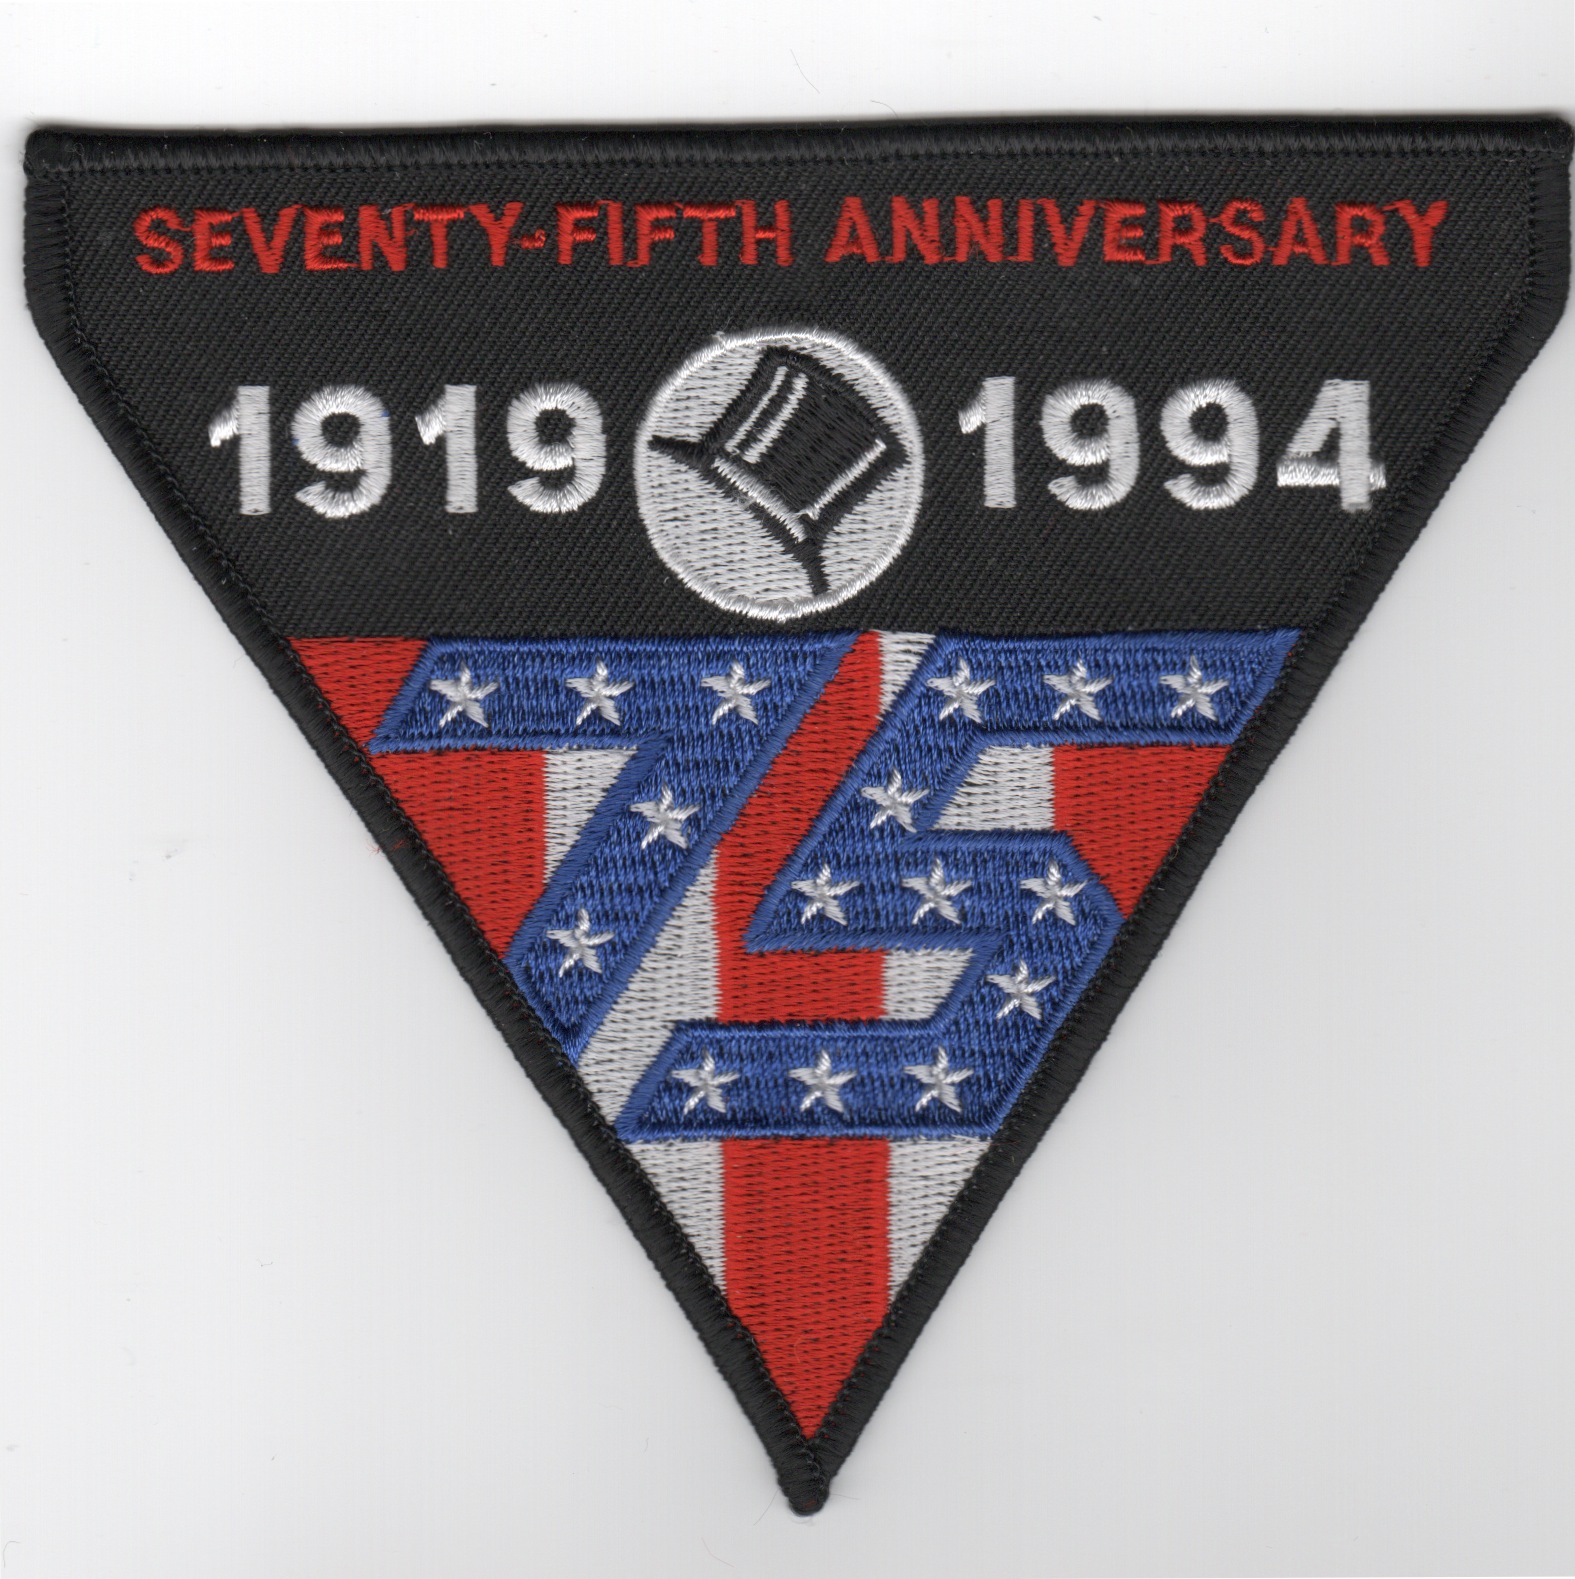 VF-14 *75th Anniversary* Patch (Triangle)